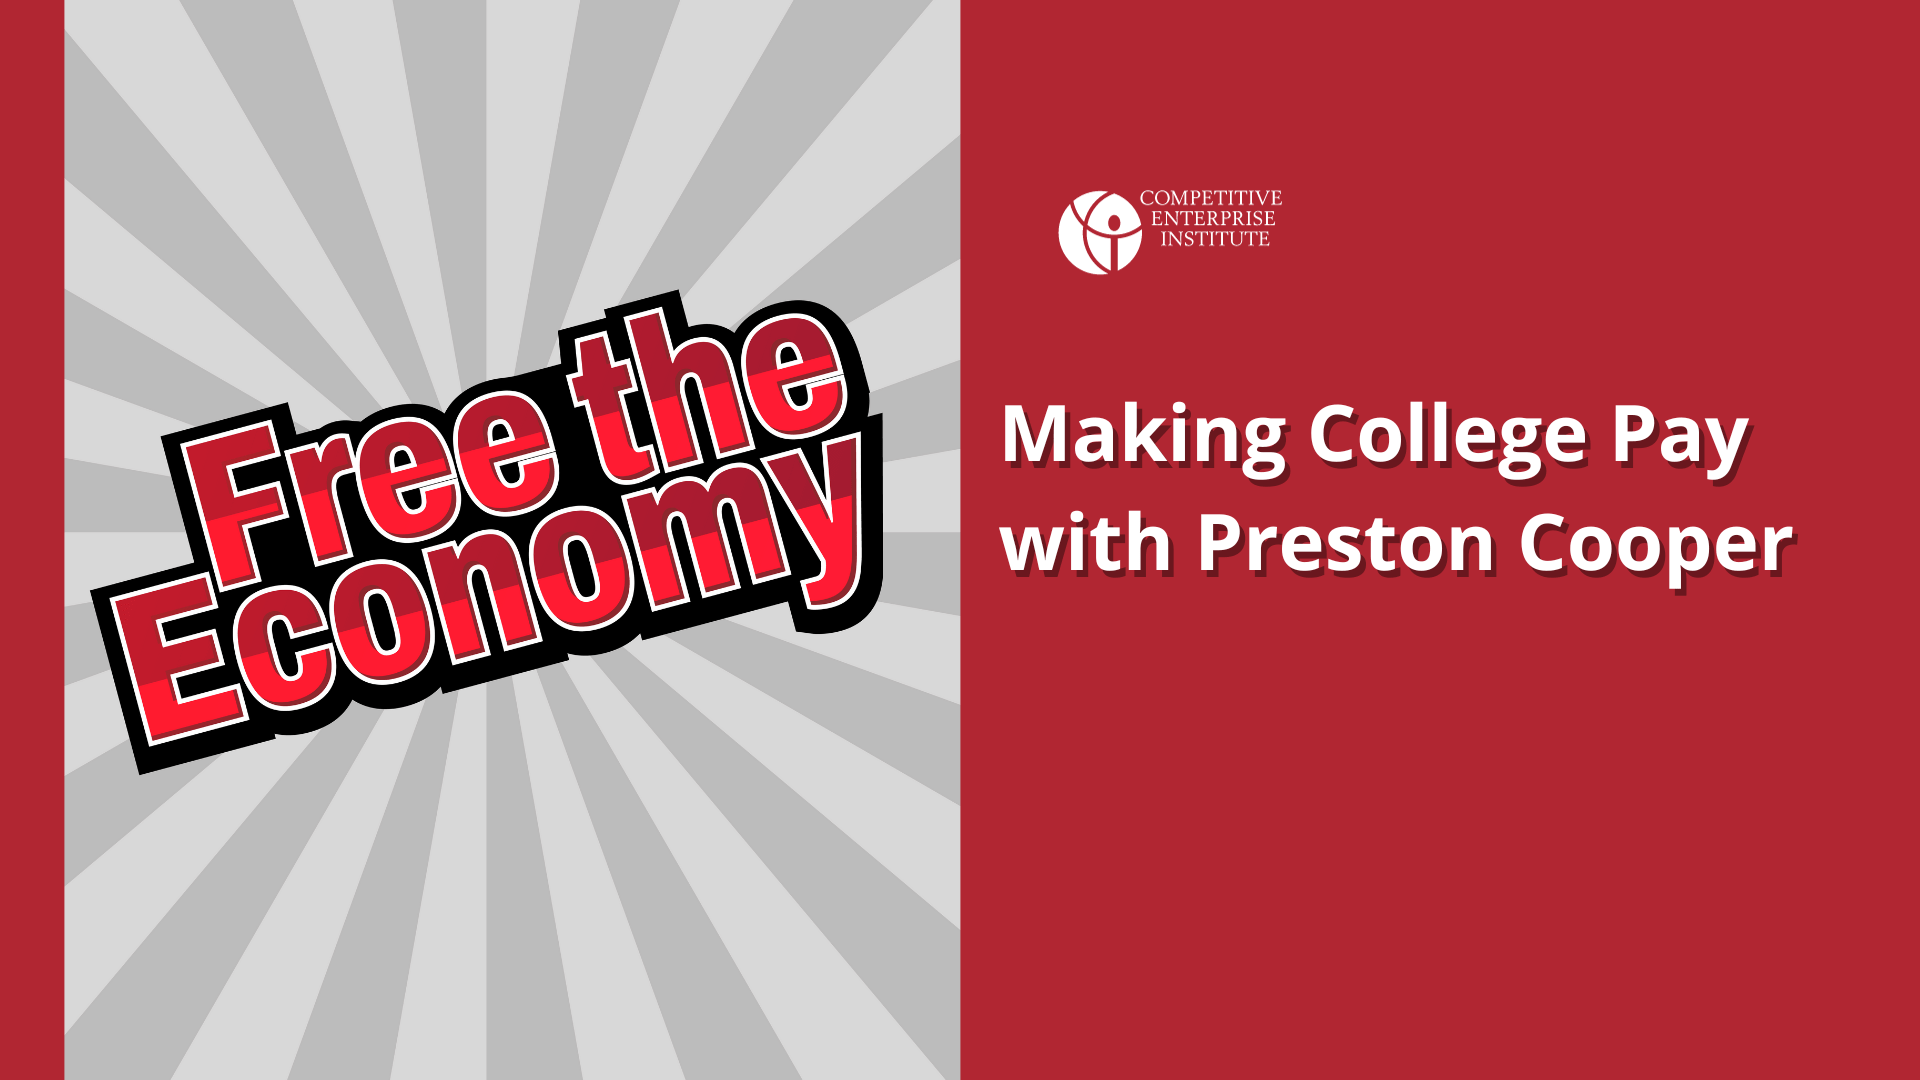 Making College Pay with Preston Cooper